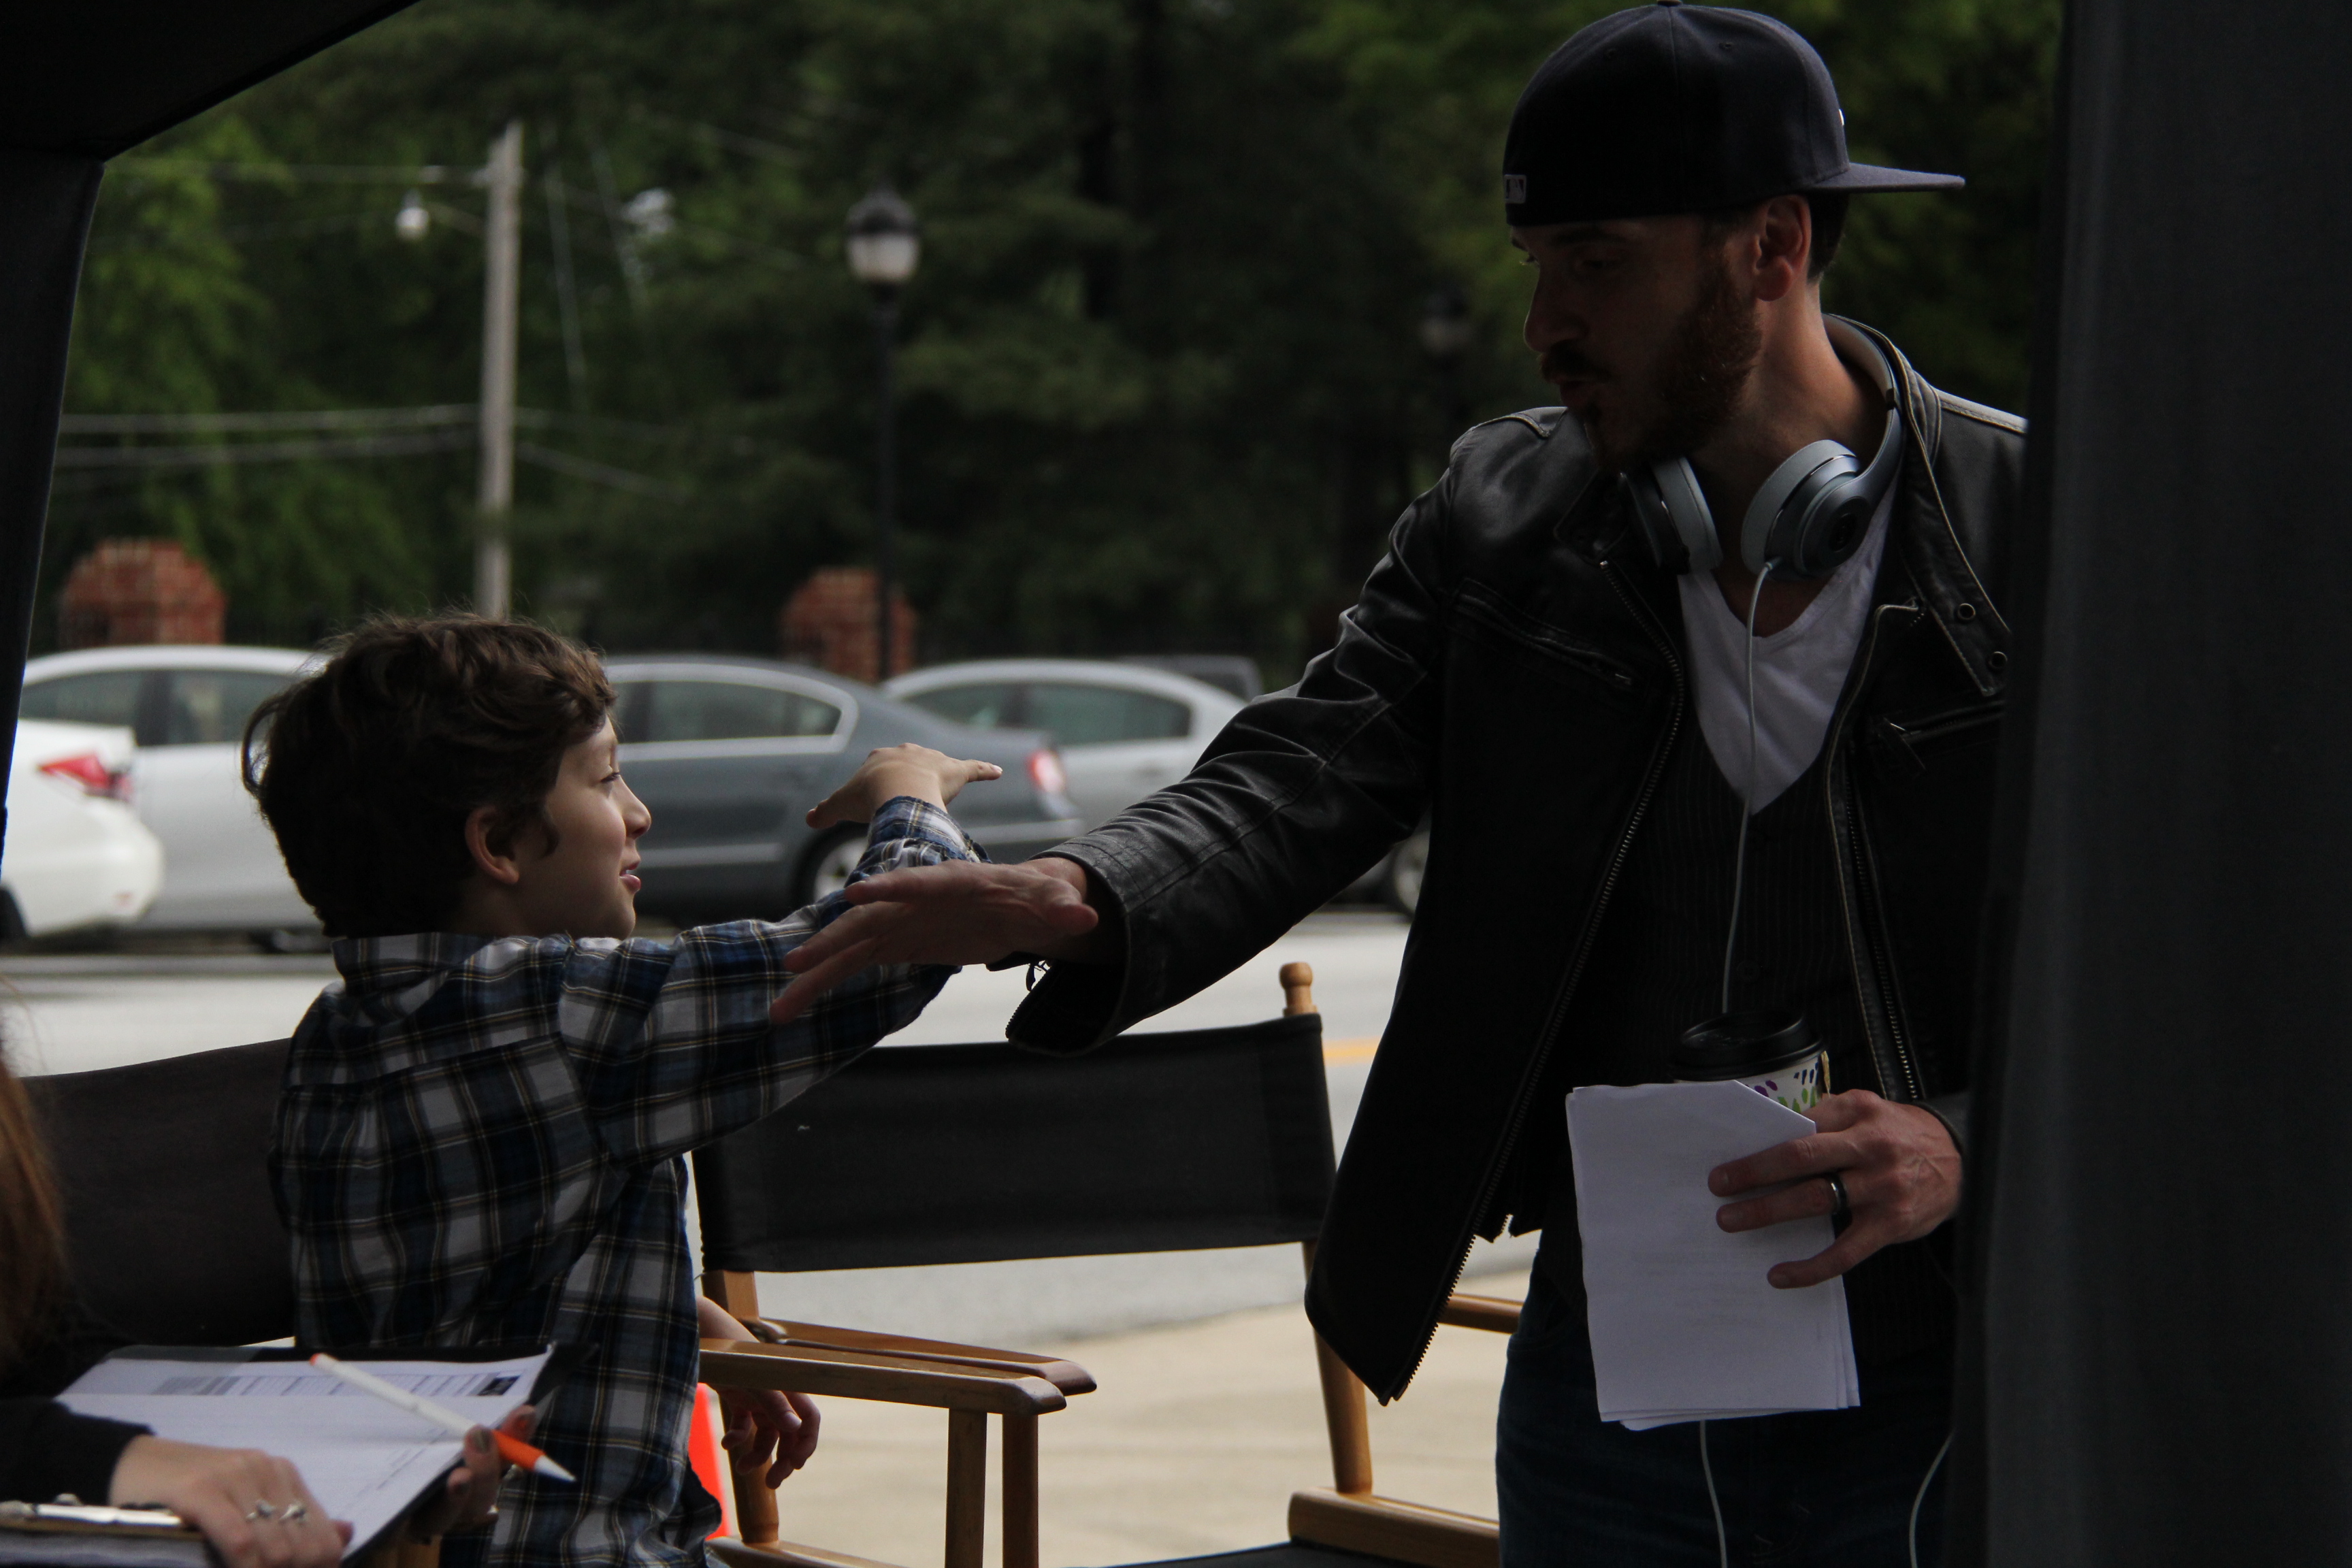 Cassius DeVan on set of Tell Me Your Name with director Jason DeVan